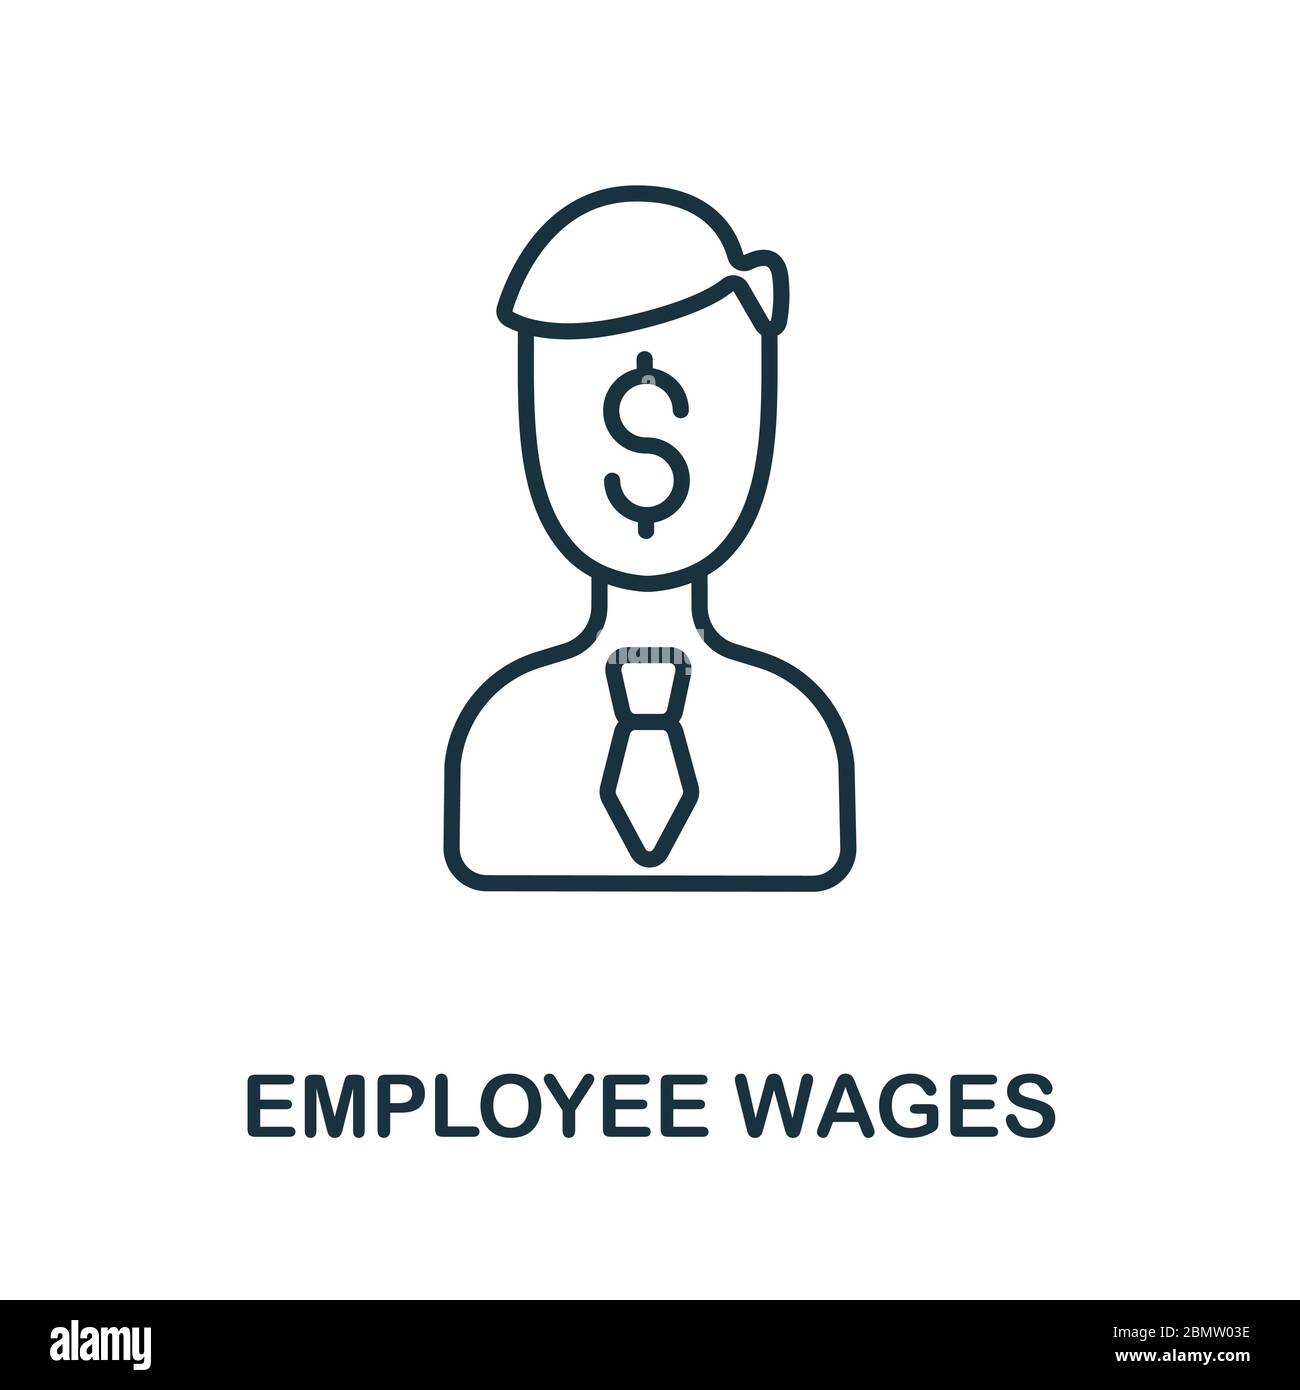 Employee Wages icon from business training collection. Simple line Employee Wages icon for templates, web design and infographics Stock Vector